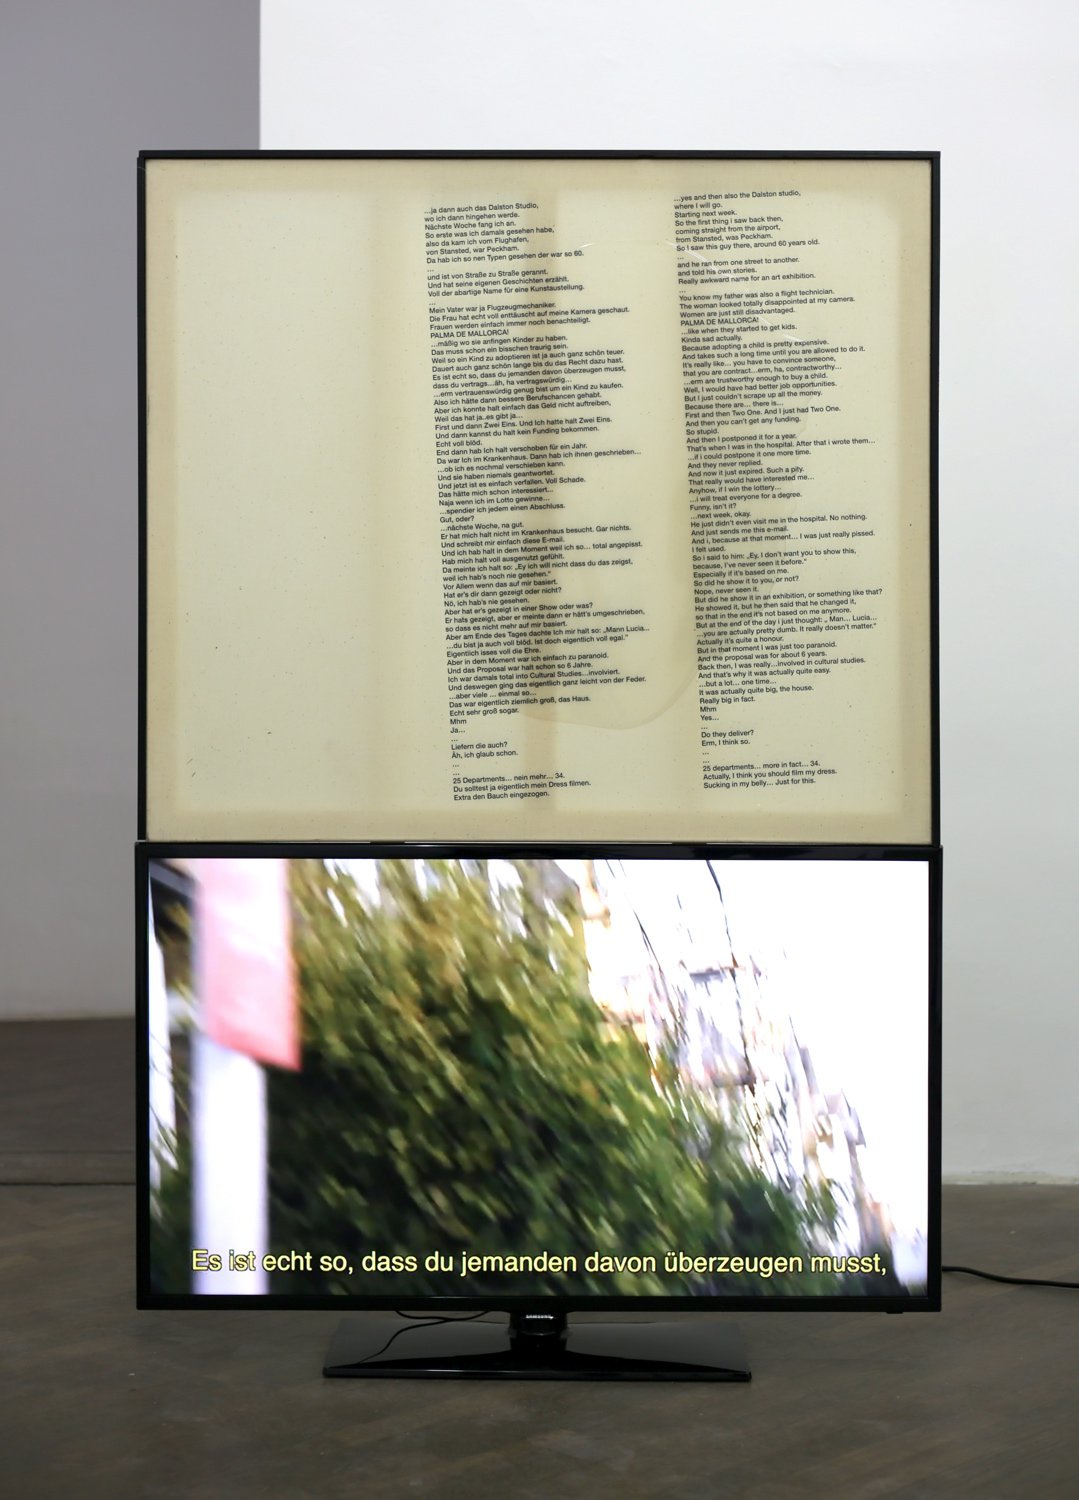 Philipp TimischlPatchy at best (D/E), 2014UV-direct print on epoxy resin on canvas above flatscreen, two videos each 00:05:16 (loop)159 x 105 x 5 cm